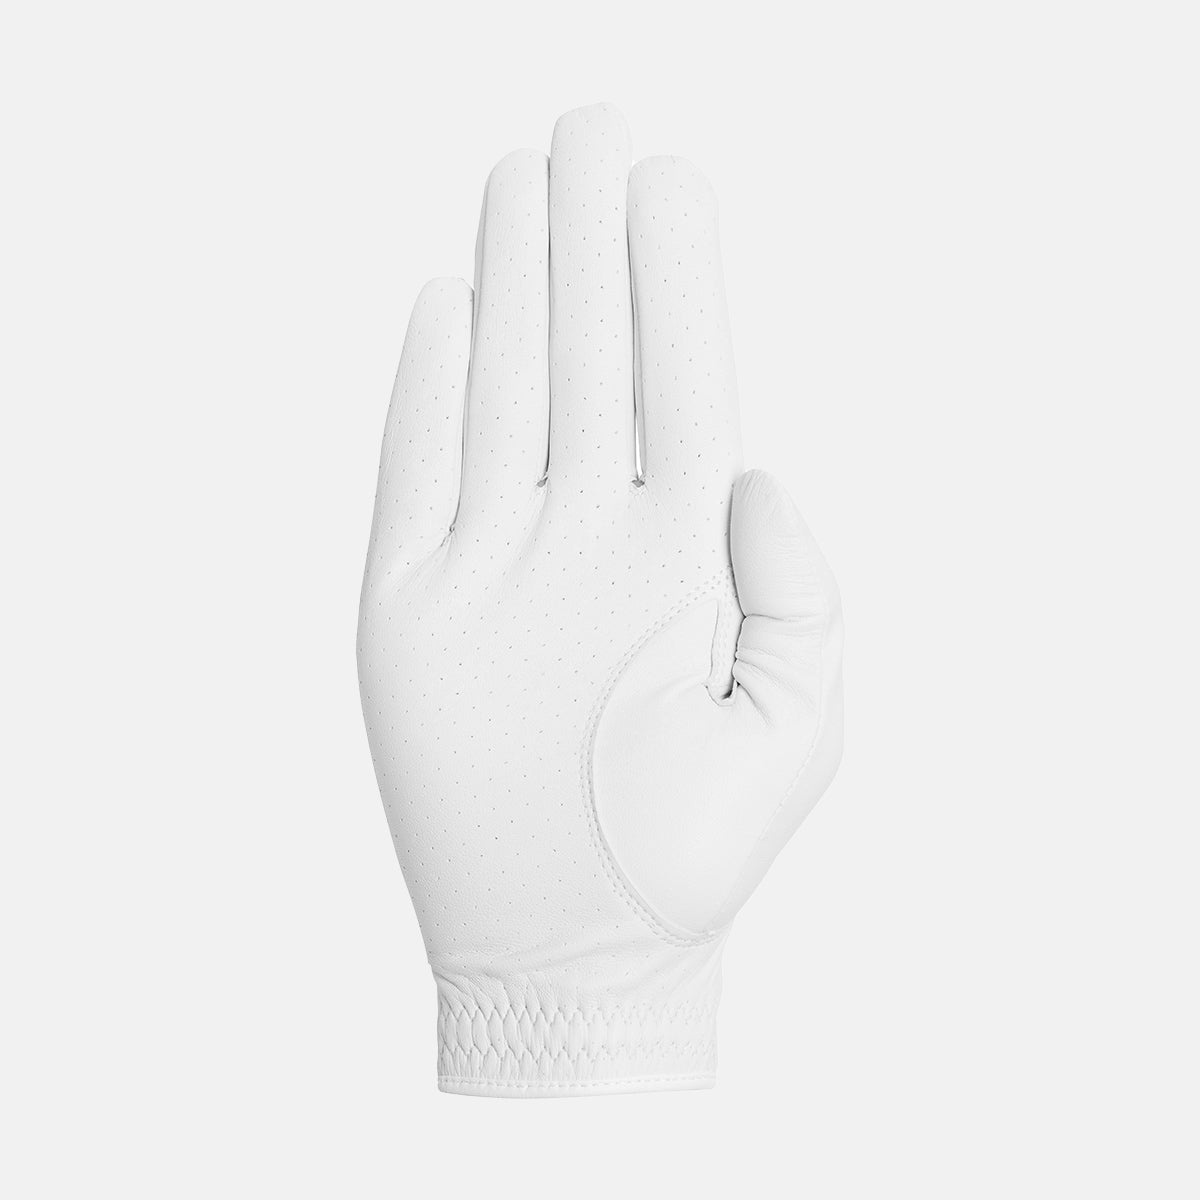 Brompton Golf Glove for Men's in colors White/Navy/Red (Left) made from Cabretta leather